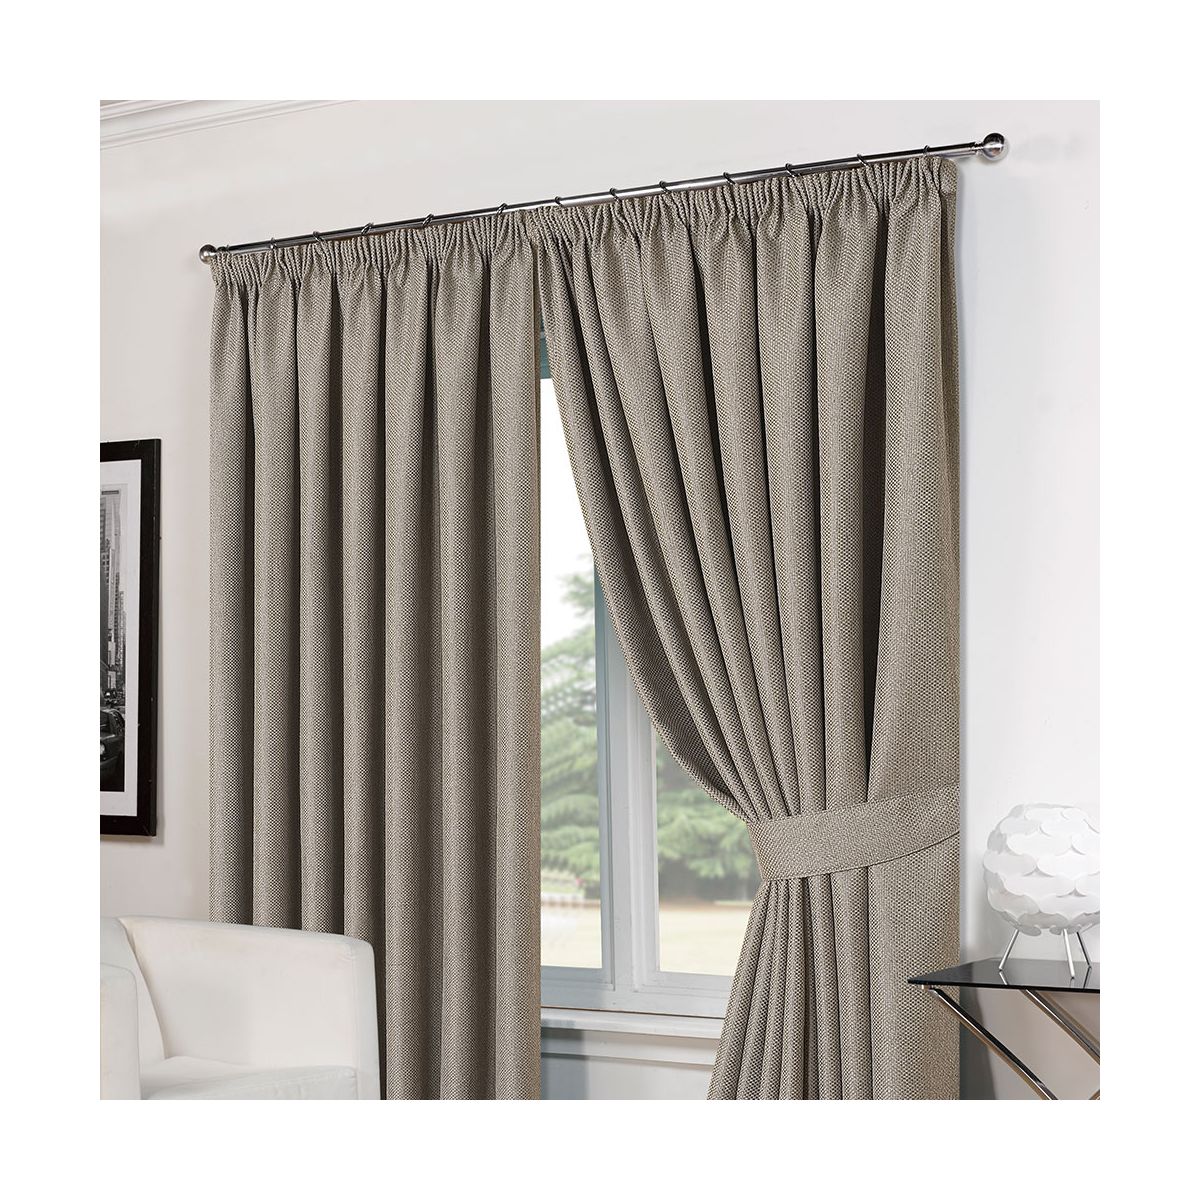 Luxury Basket Weave Lined Tape Top Curtains with Tiebacks - Silver/Grey 66x72